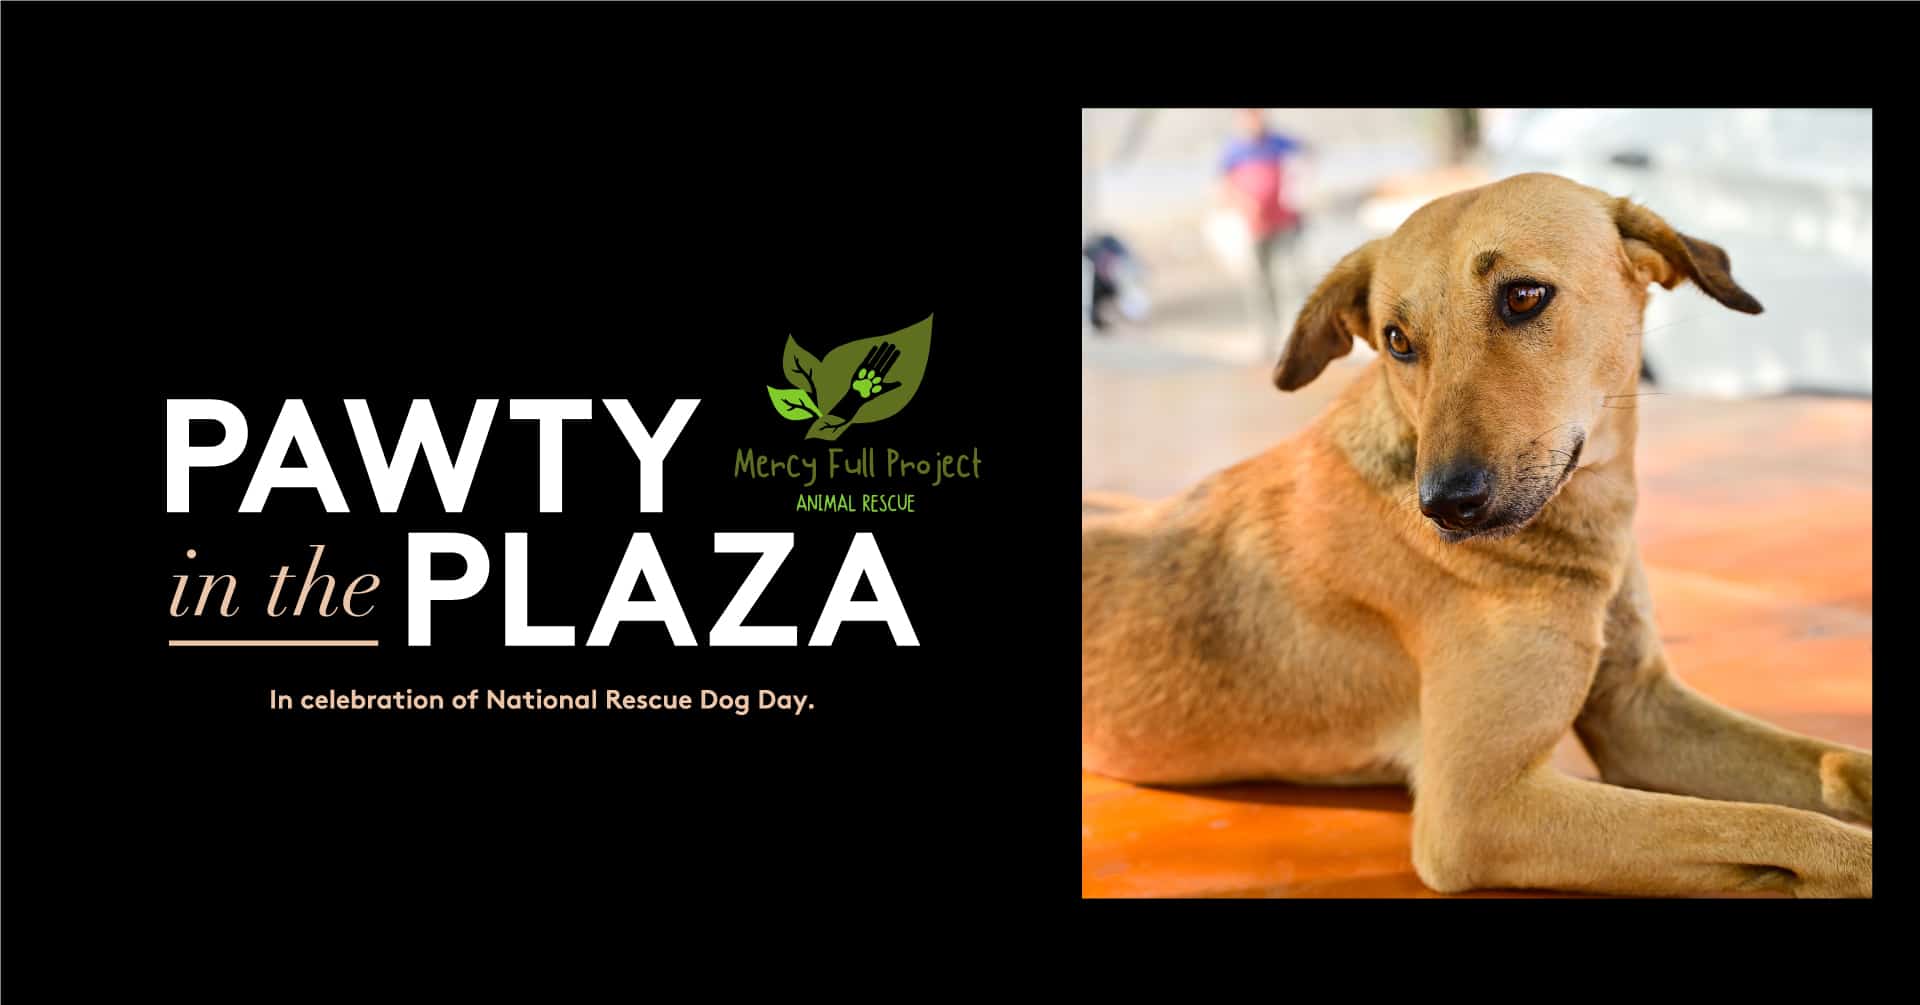 Pawty in the Plaza